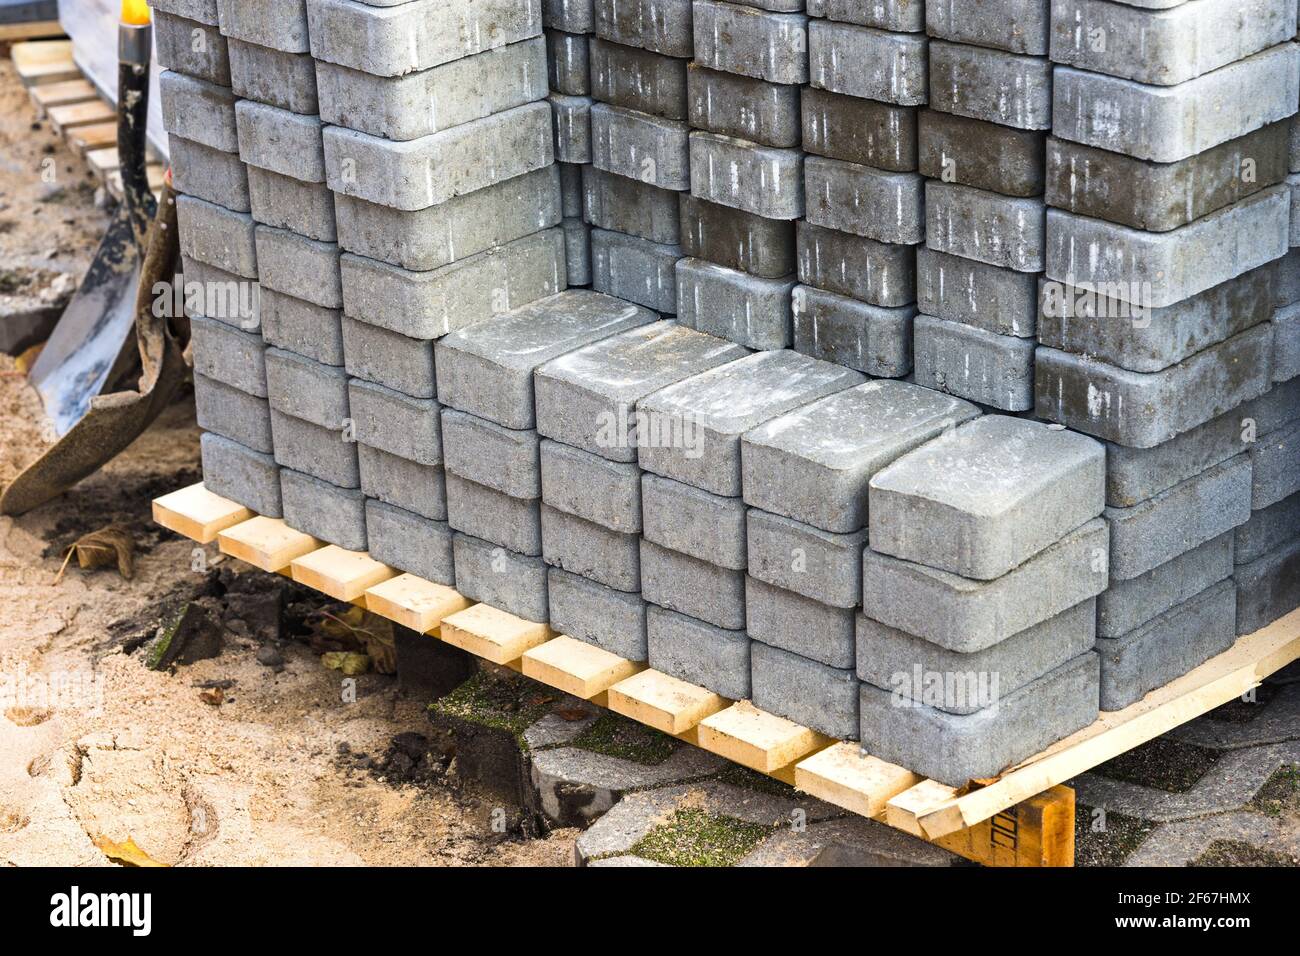 Concrete blocks prepared for the paving of a street Stock Photo